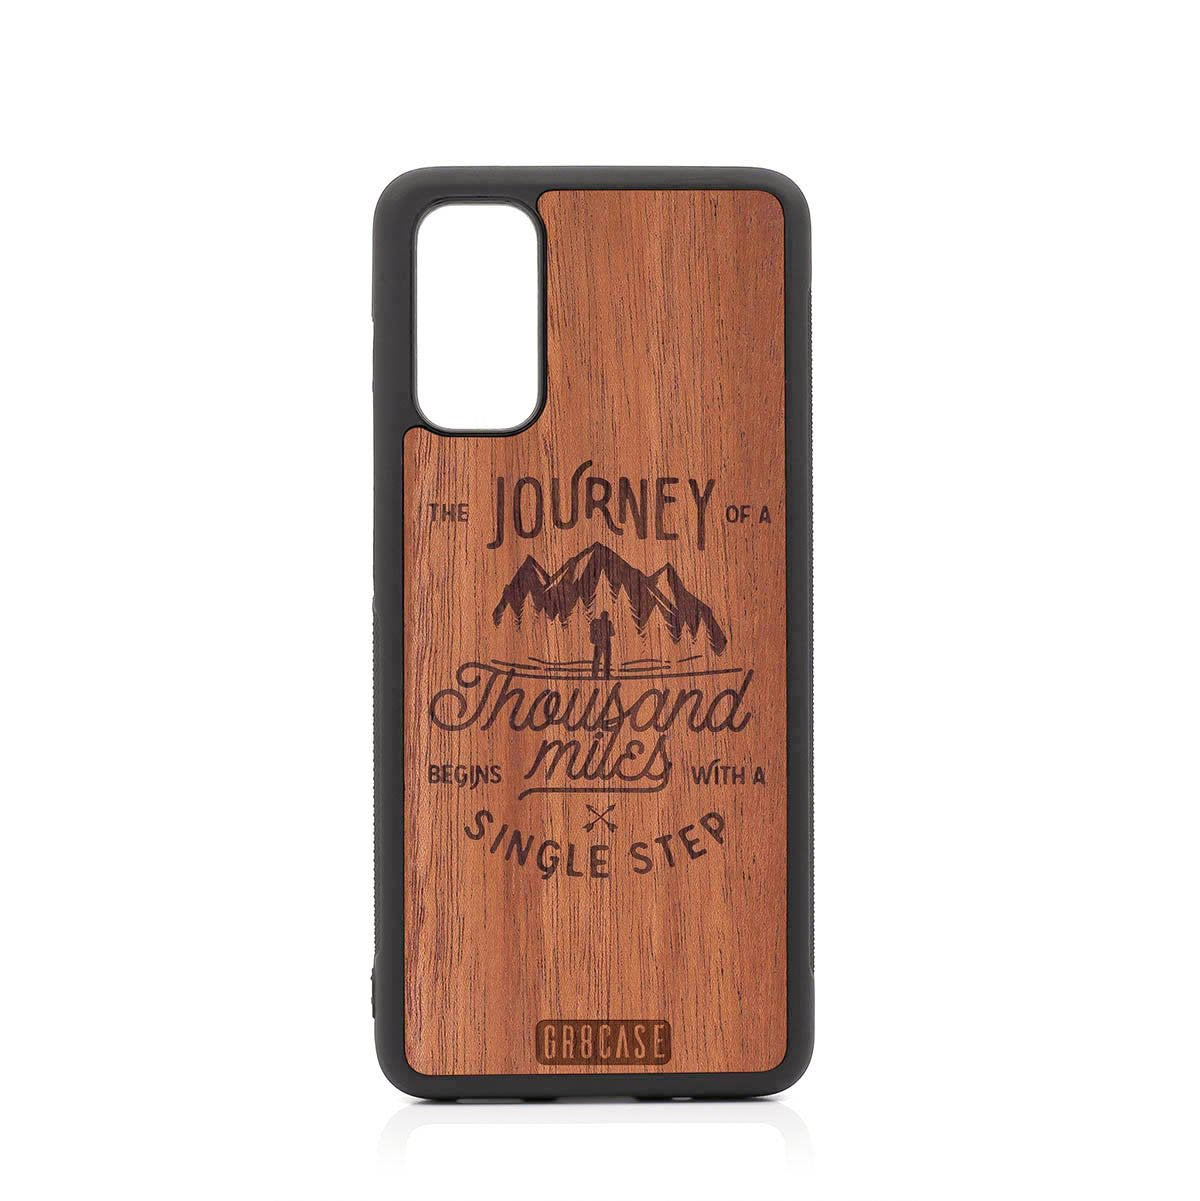 The Journey Of A Thousand Miles Begins With A Single Step Design Wood Case For Samsung Galaxy S20 FE 5G